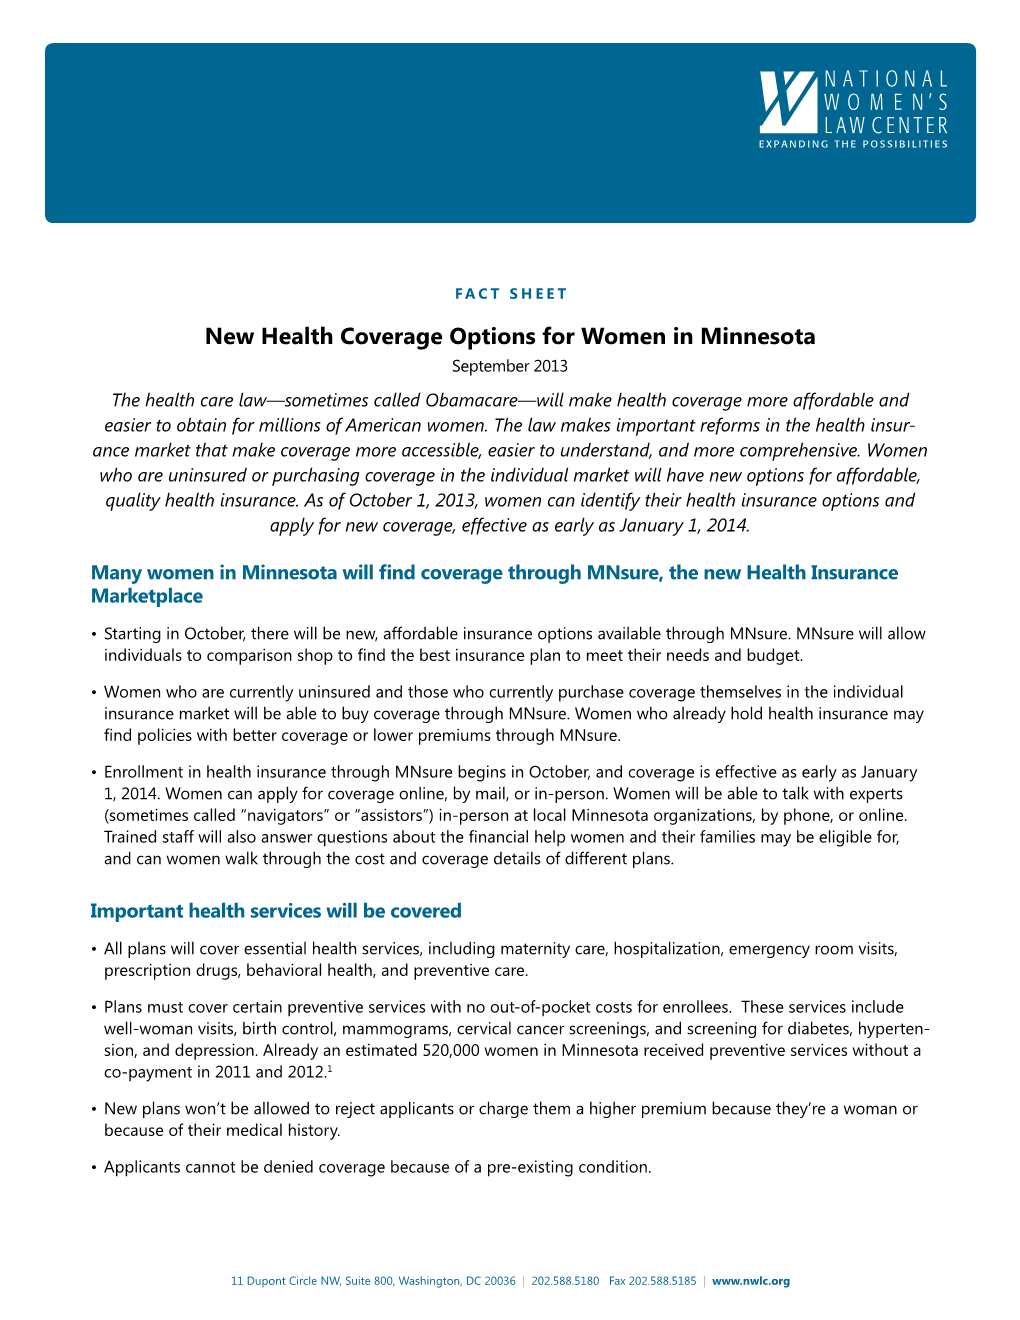 New Health Coverage Options for Women in Minnesota